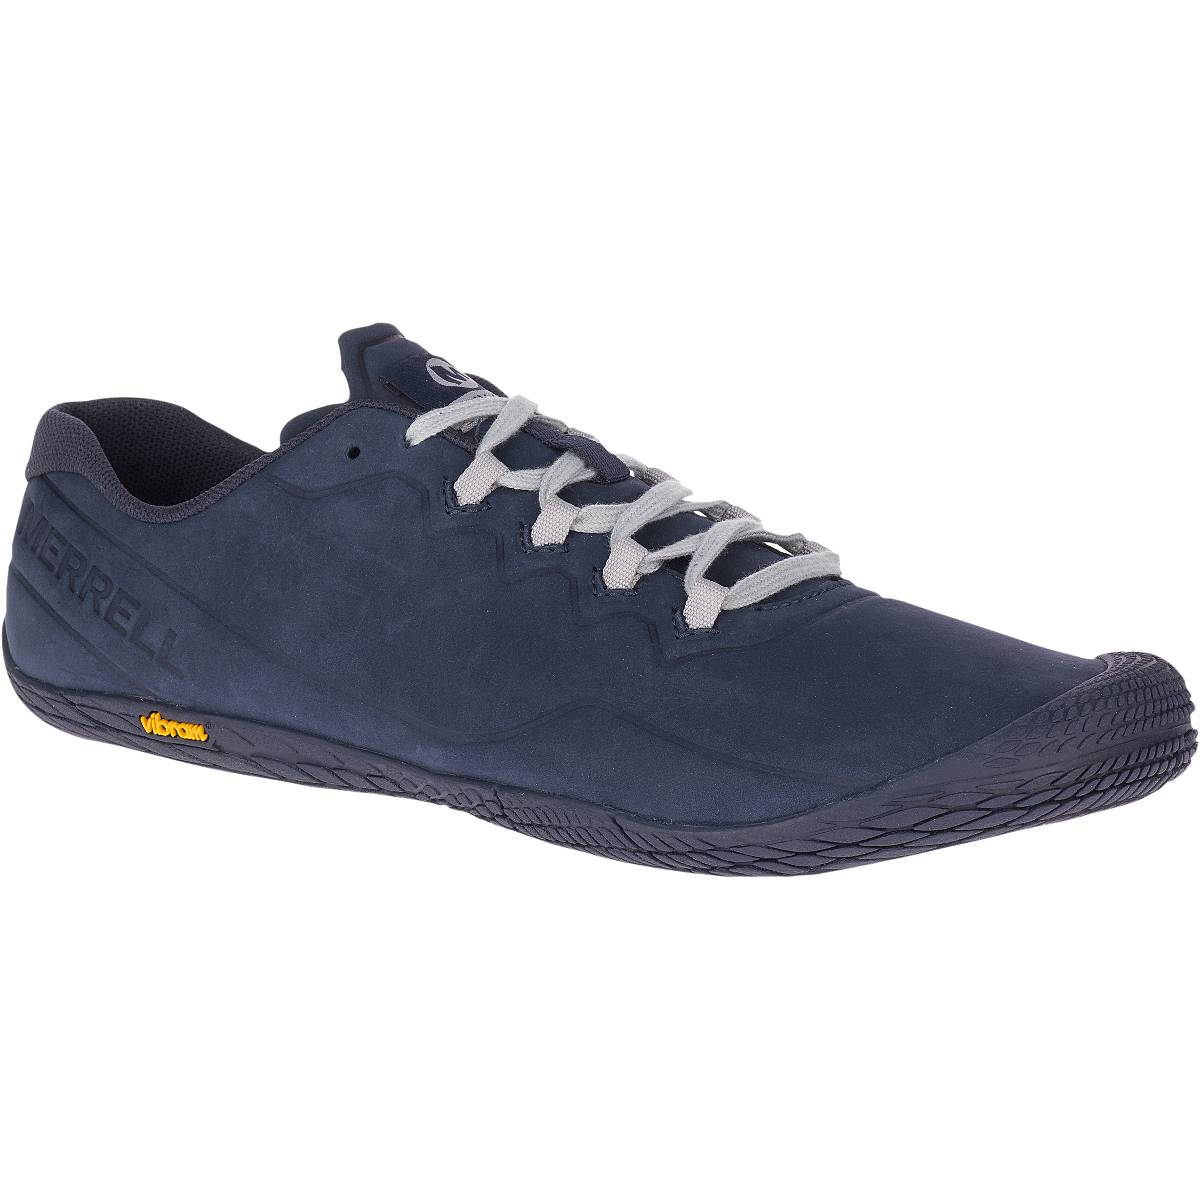 Picture of Merrell Vapor Glove 3 Luna Leather Barefoot Shoes - navy